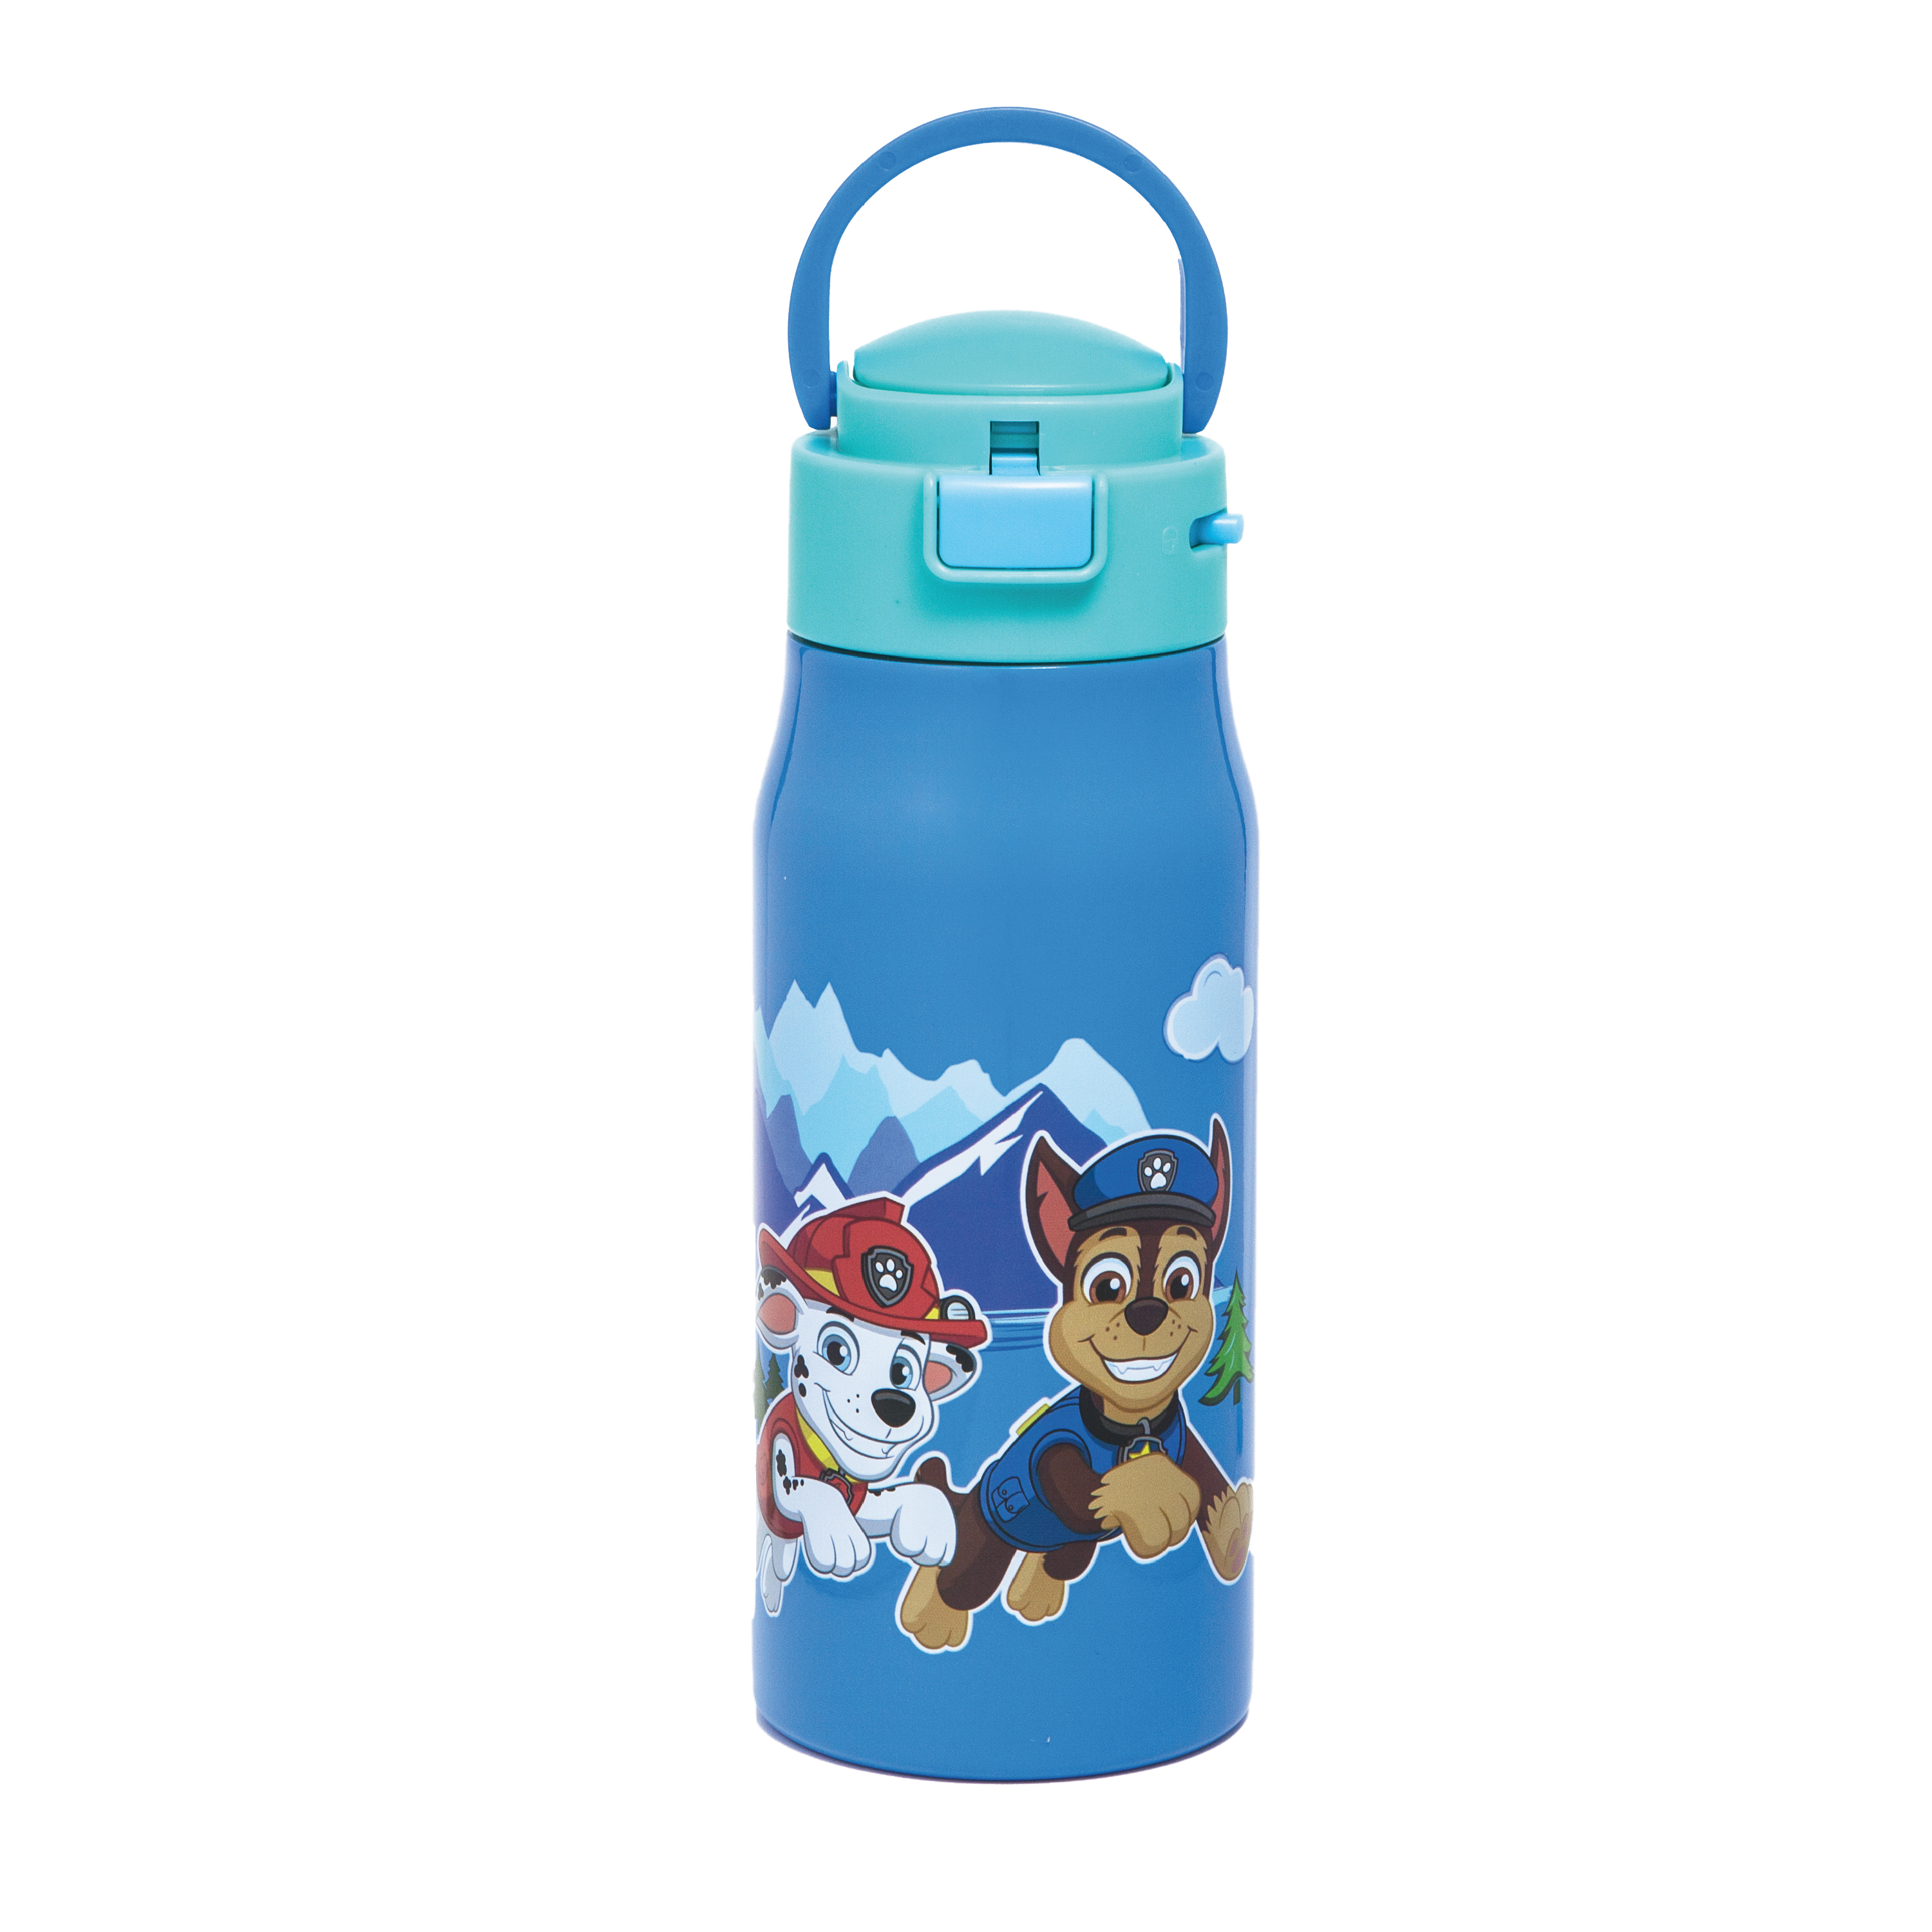 Paw Patrol 13.5 ounce Mesa Double Wall Insulated Stainless Steel Water Bottle, Chase and Marshall slideshow image 2